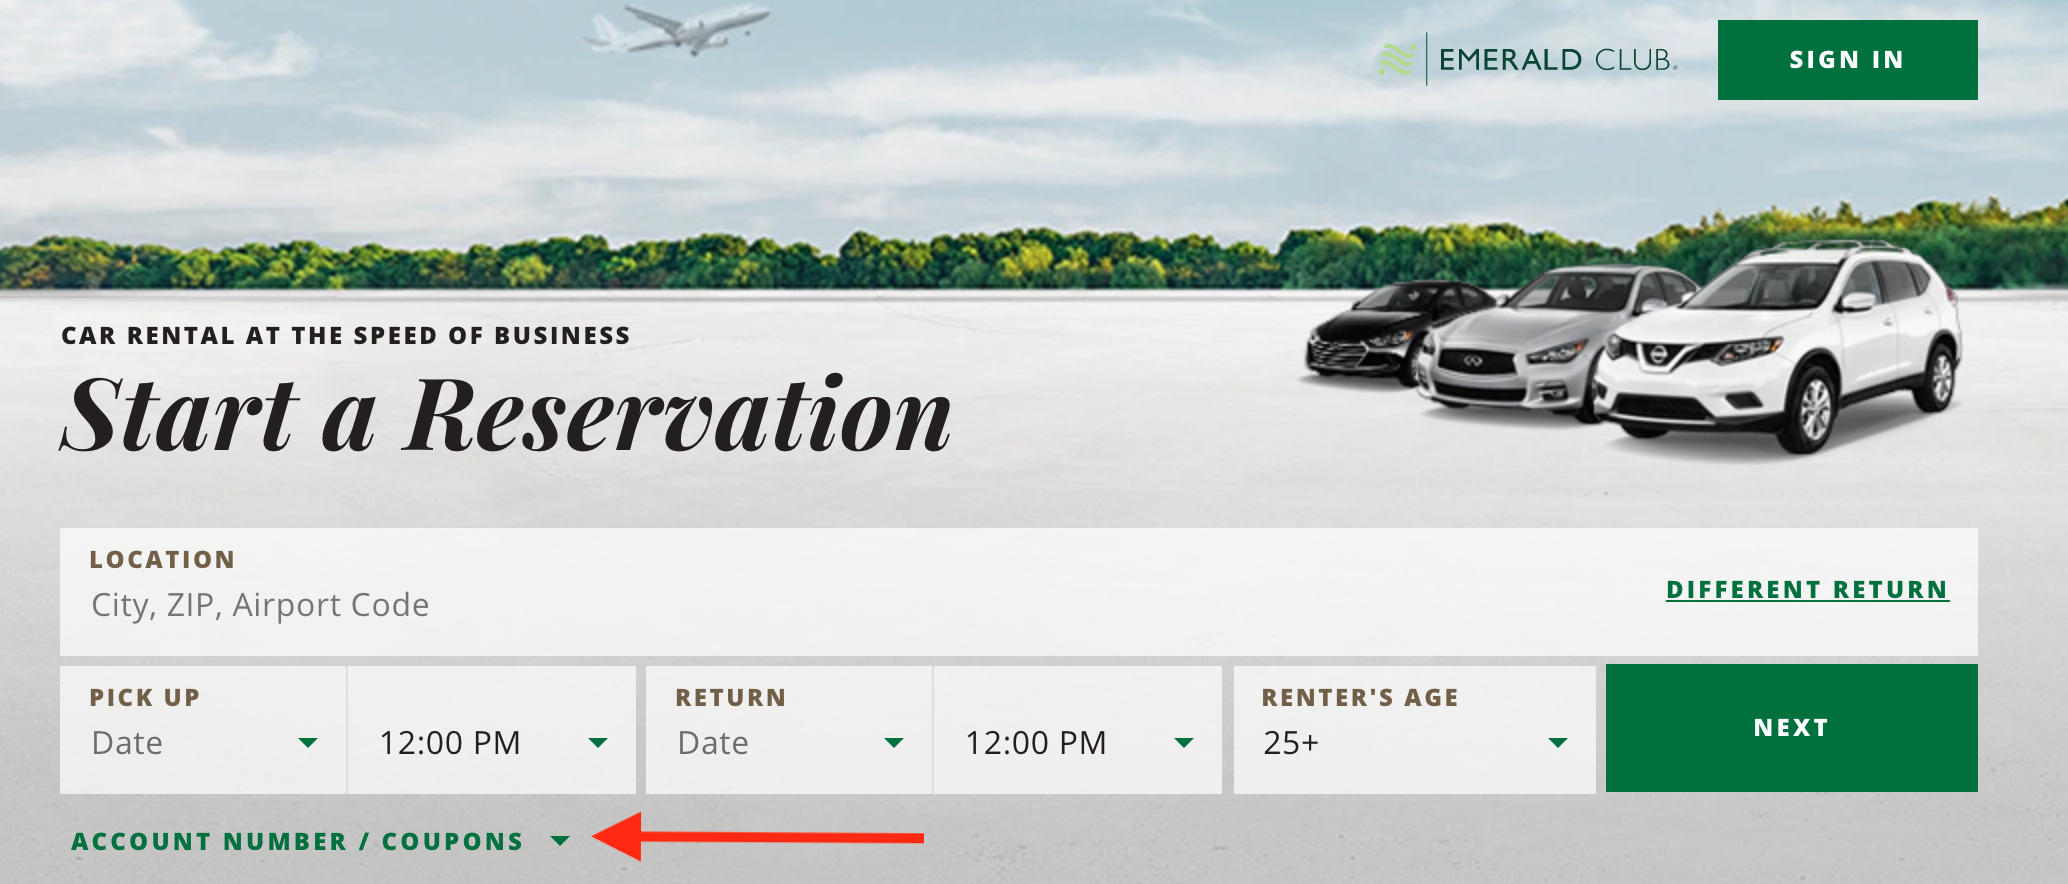 The Ultimate Guide to National Car Rental [Emerald Club Loyalty Program]